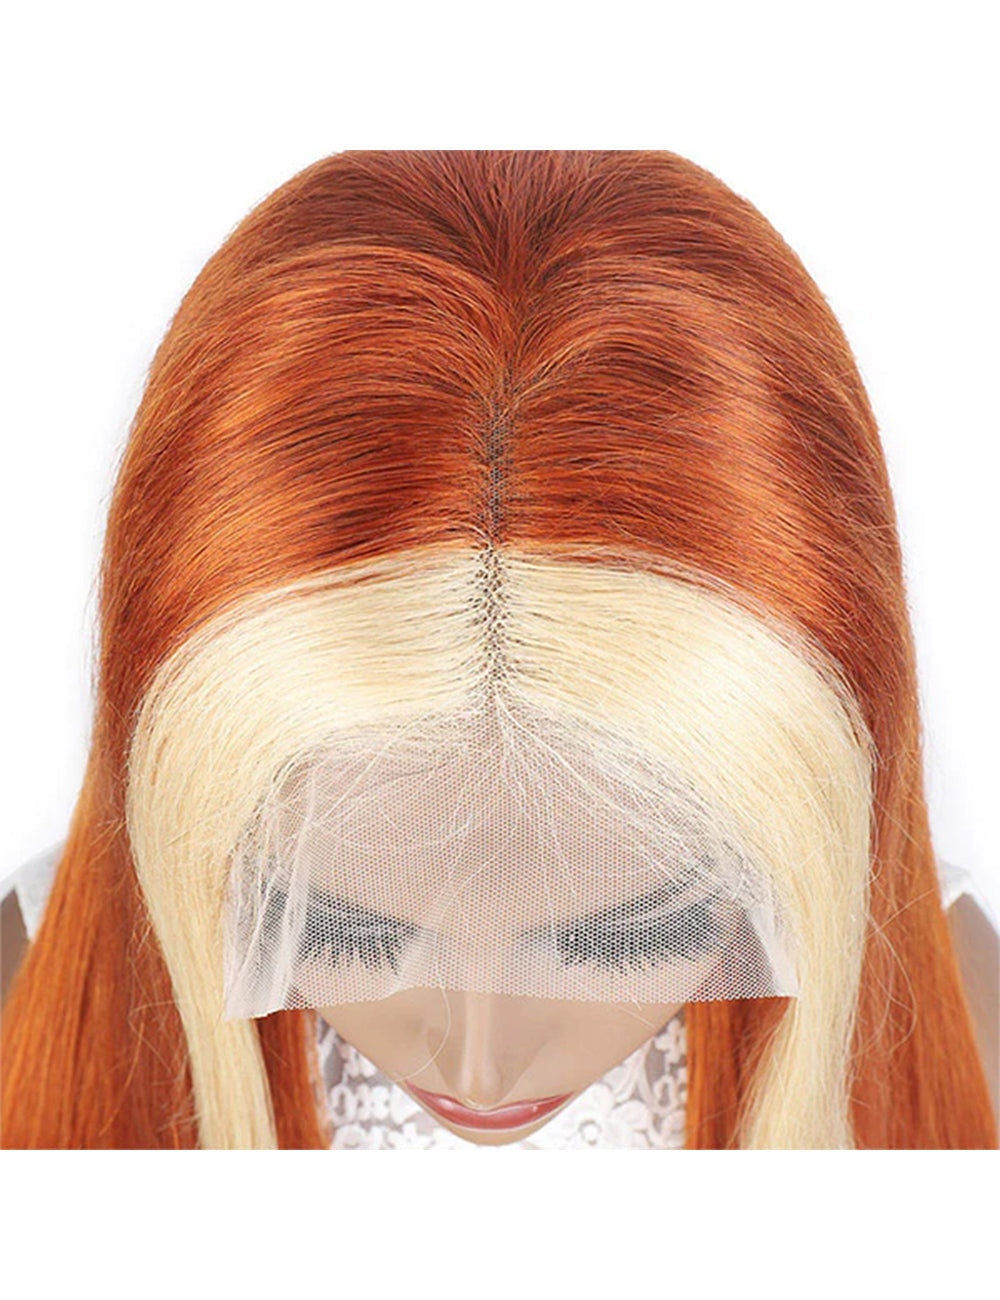 30 Inch Ginger Blonde Wig Straight Human Hair Wigs 13x4 Lace Front Wigs 200% Density